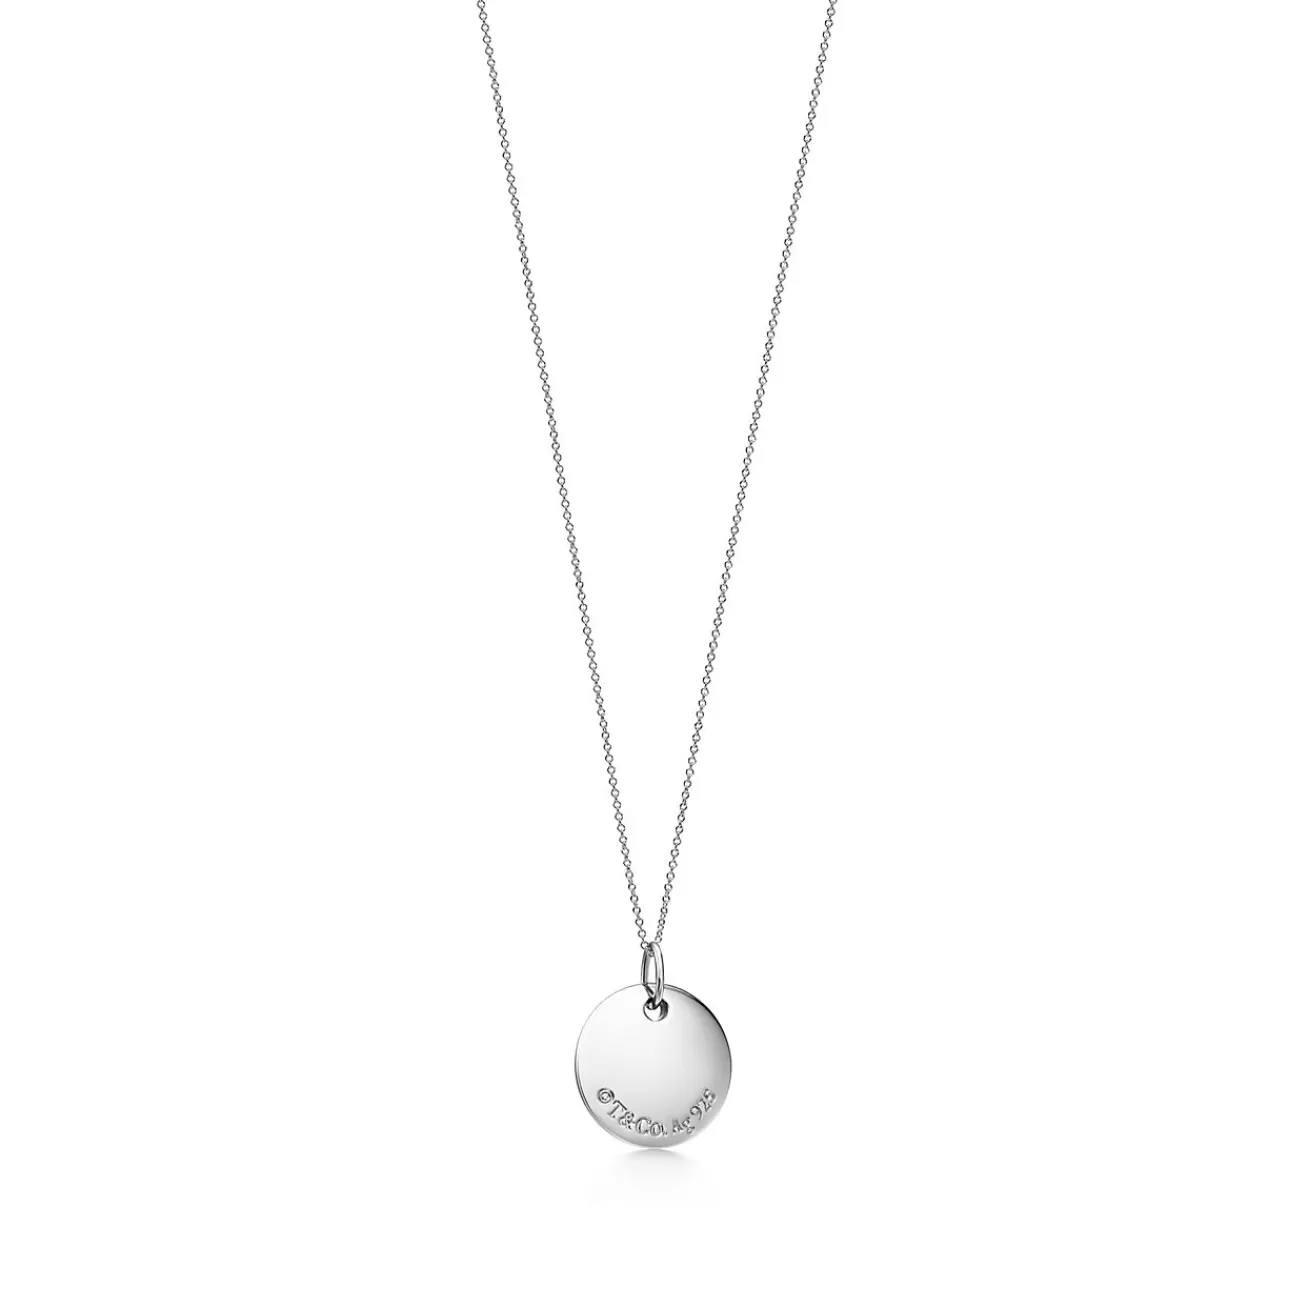 Tiffany & Co. Tiffany Notes alphabet disc charm in silver on a chain. Letters A-Z available. | ^ Necklaces & Pendants | Gifts for Her